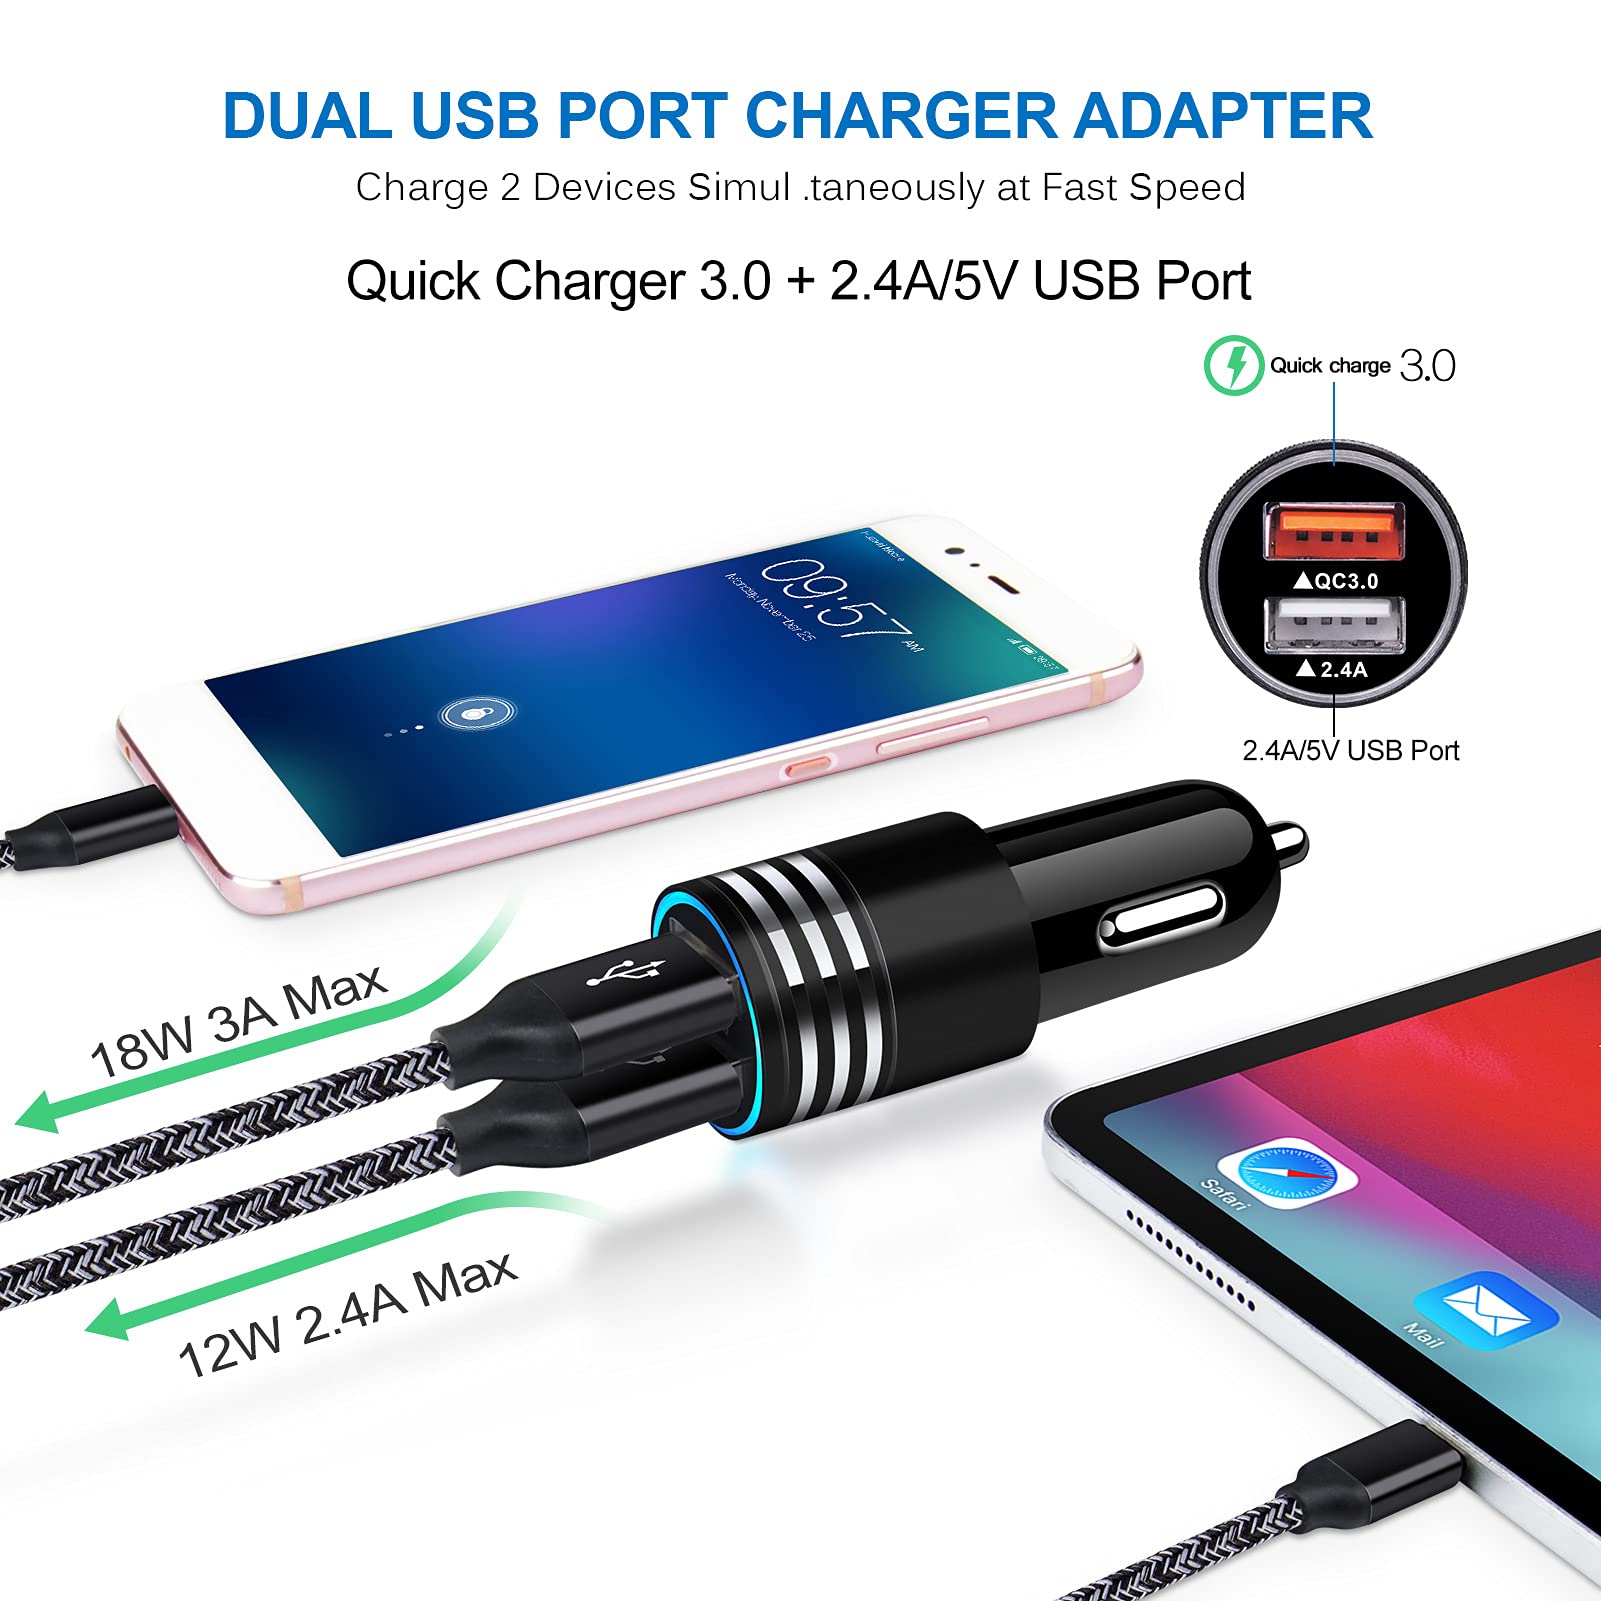 USB C Fast Charger for Samsung Galaxy S23/S22/S21/S21 Ultra/S21+/S20 FE Note 20 Ultra A13 A53 A12 A32 A42 A21 A51 A71 A10E A20 A50 S10 S9 S8,Quick Charge 3.0 Wall Charger Car Adapter 6FT Type C Cable